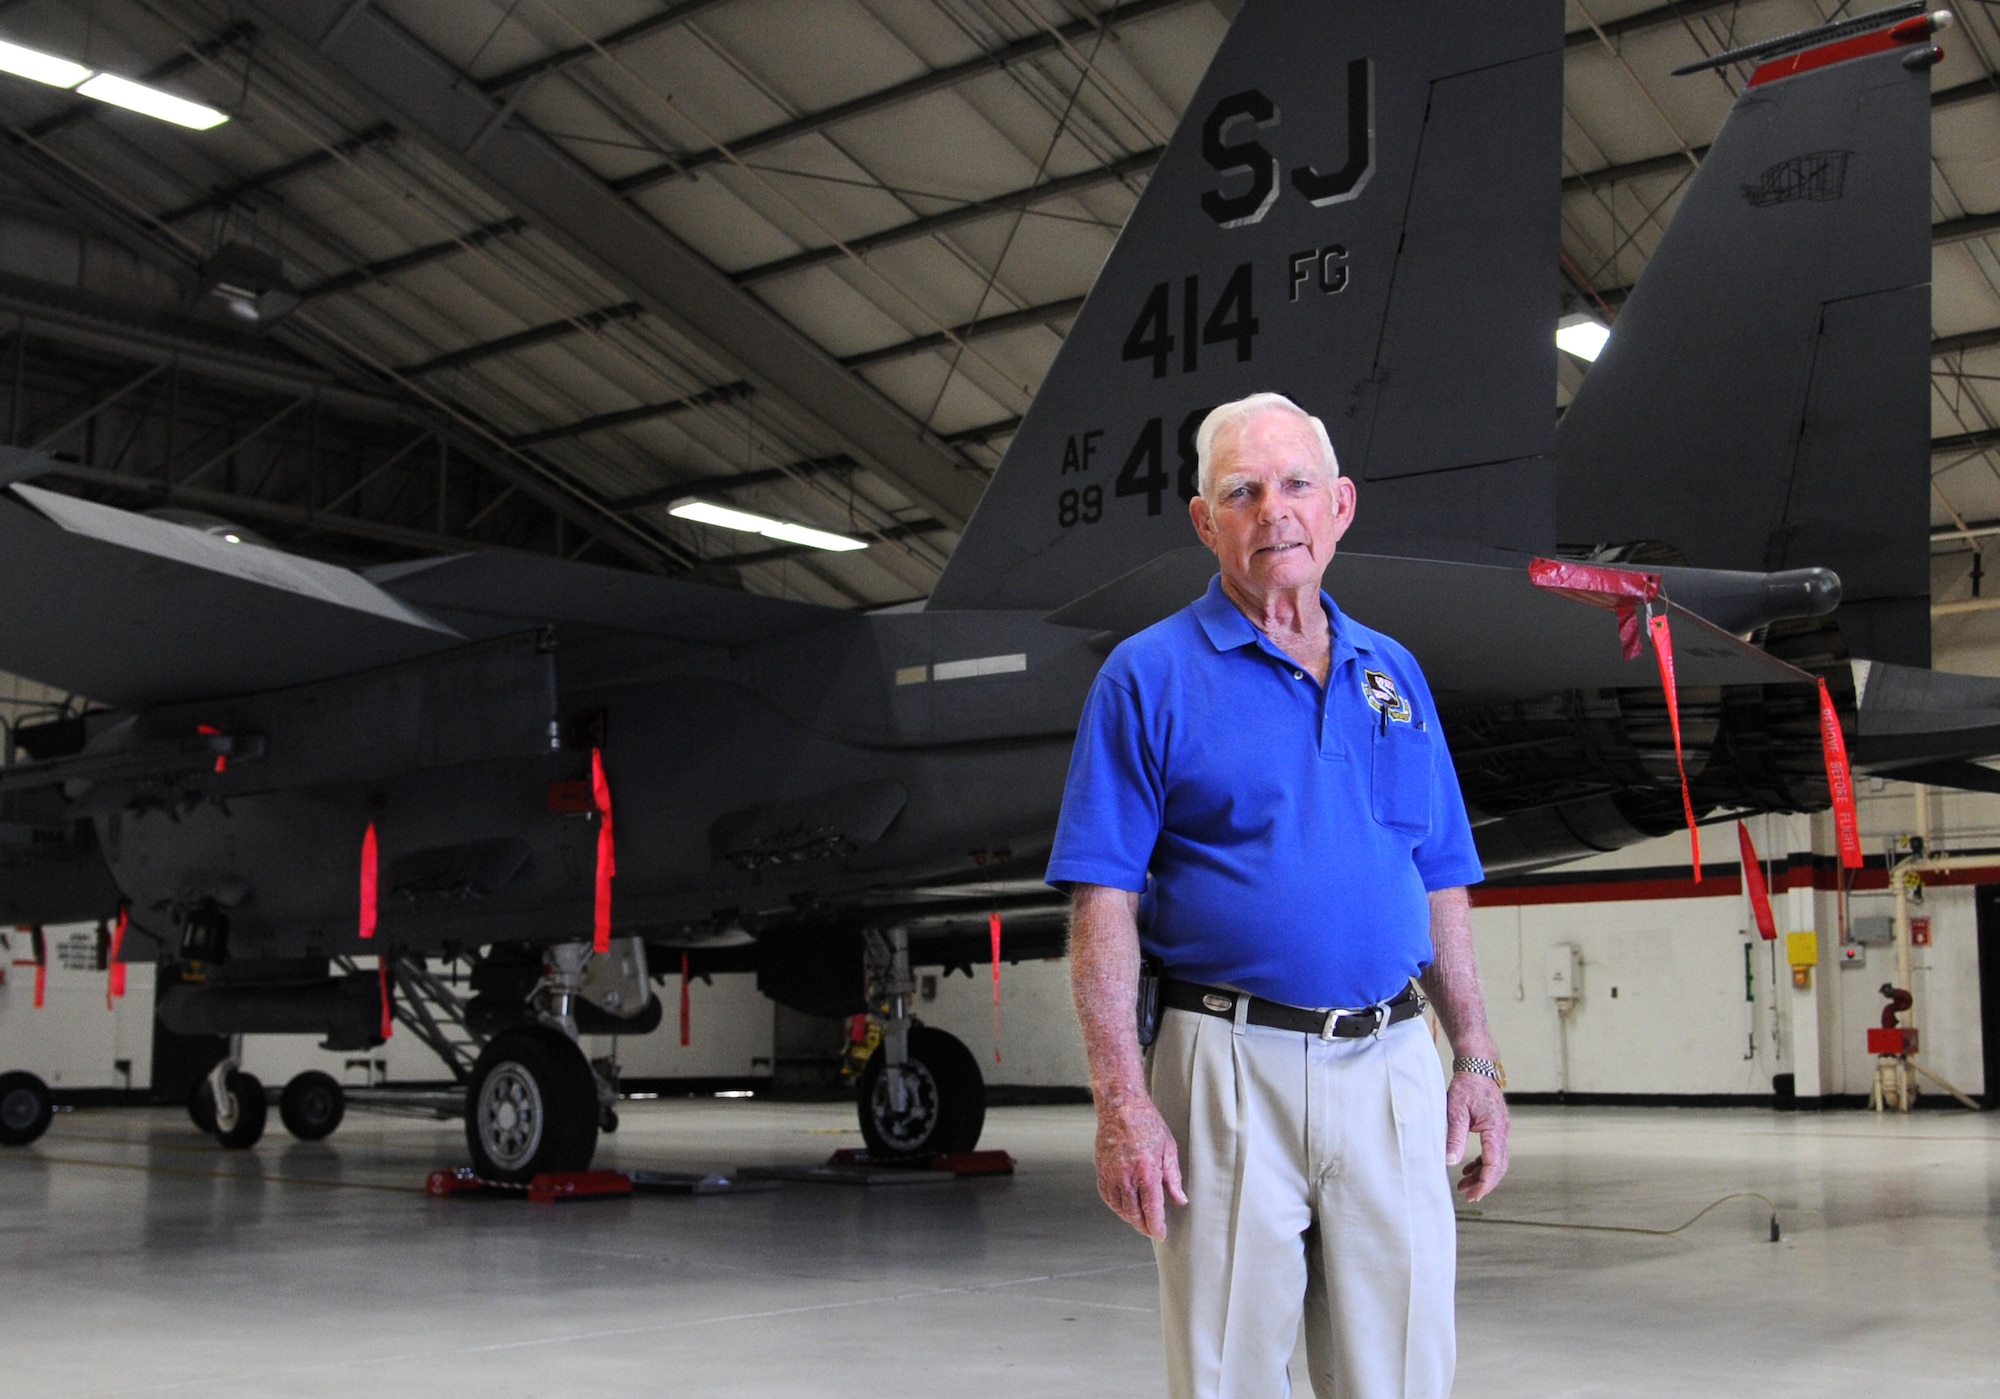 Retired Lt. Col. Robert Pardo in front of a 333rd Fighter Squadron F-15E Strike Eagle during a tour of Seymour Johnson Air Force Base, North Carolina, Oct. 10, 2014. Pardo is known for his “Pardo’s Push” maneuver as a 433rd Tactical Fighter Squadron F-4 Phantom pilot stationed at Ubon Royal Thai AFB, Thailand, when he saved another F-4 aircrew from having to eject in North Vietnam by pushing their plane in the air over the Laotian border and into relative safety. (U.S. Air Force photo/Airman 1st Class Ashley J. Thum)